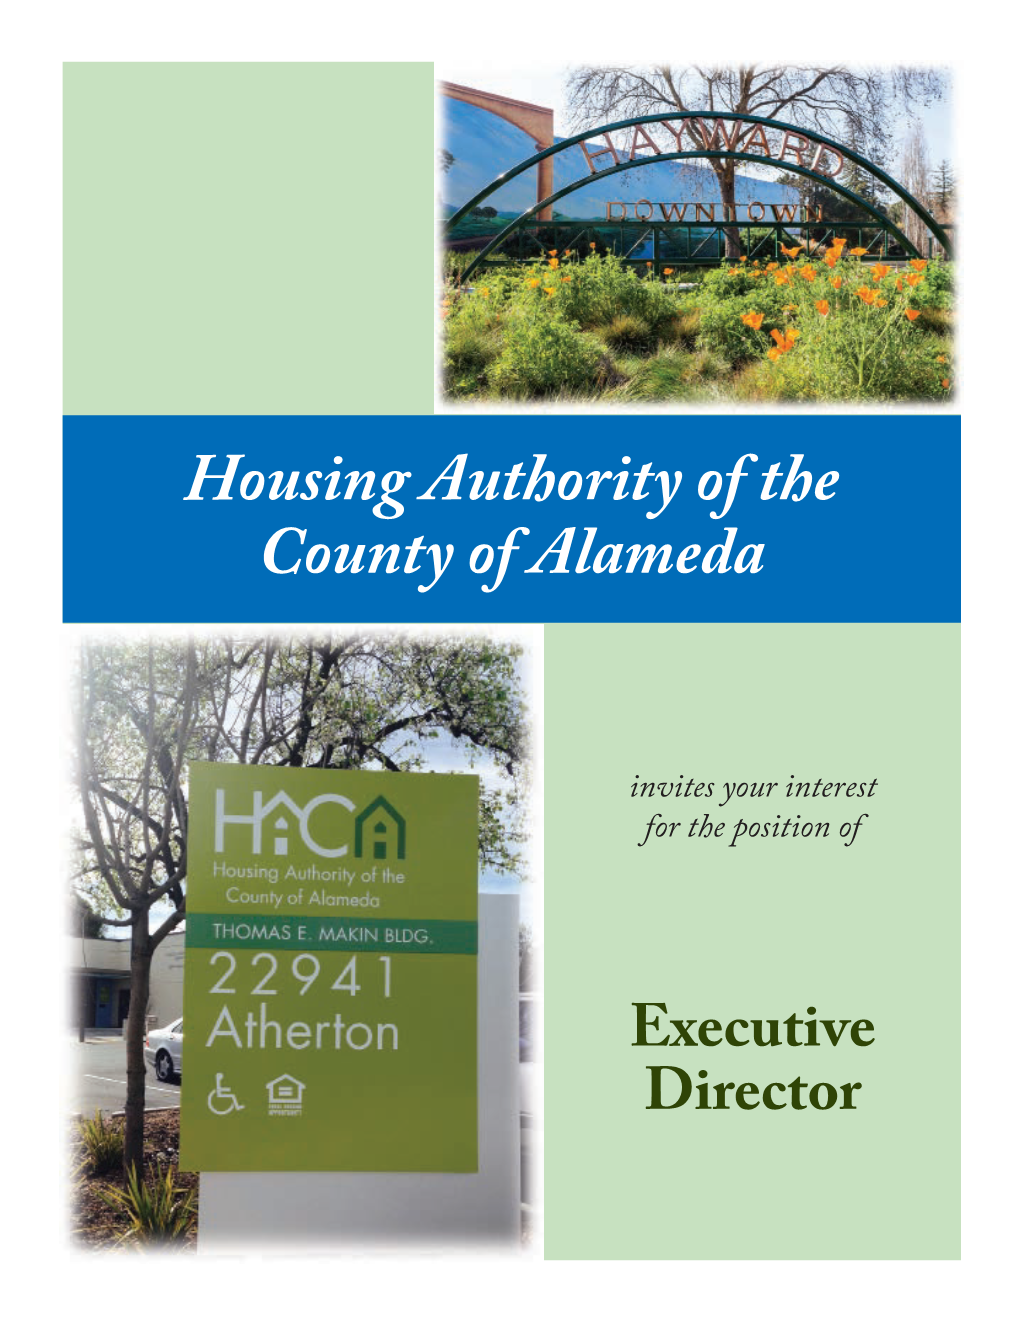 Housing Authority of the County of Alameda